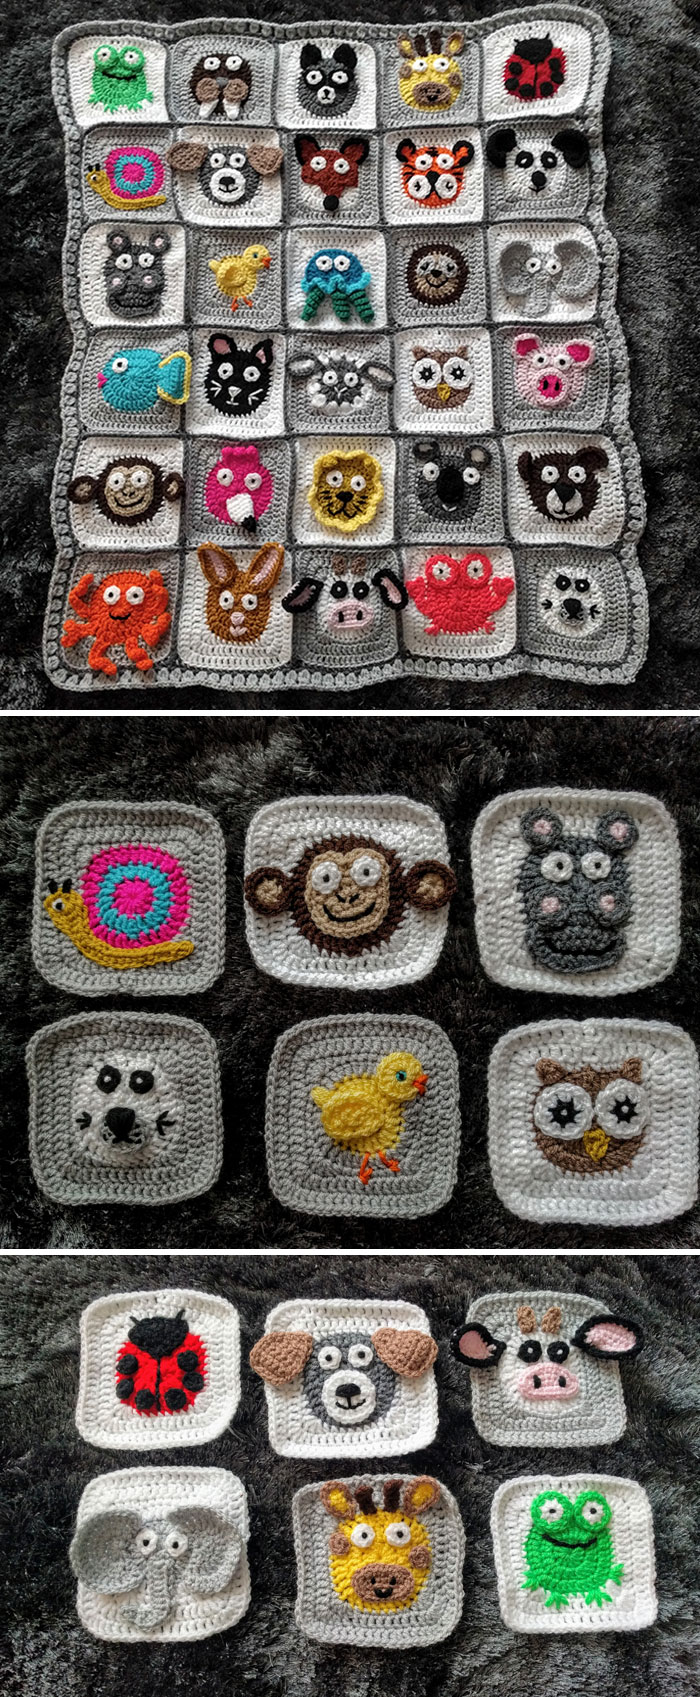 My Wonderful Colleague Is Having A Baby, So I Made Her A Zookeepers Baby Blanket